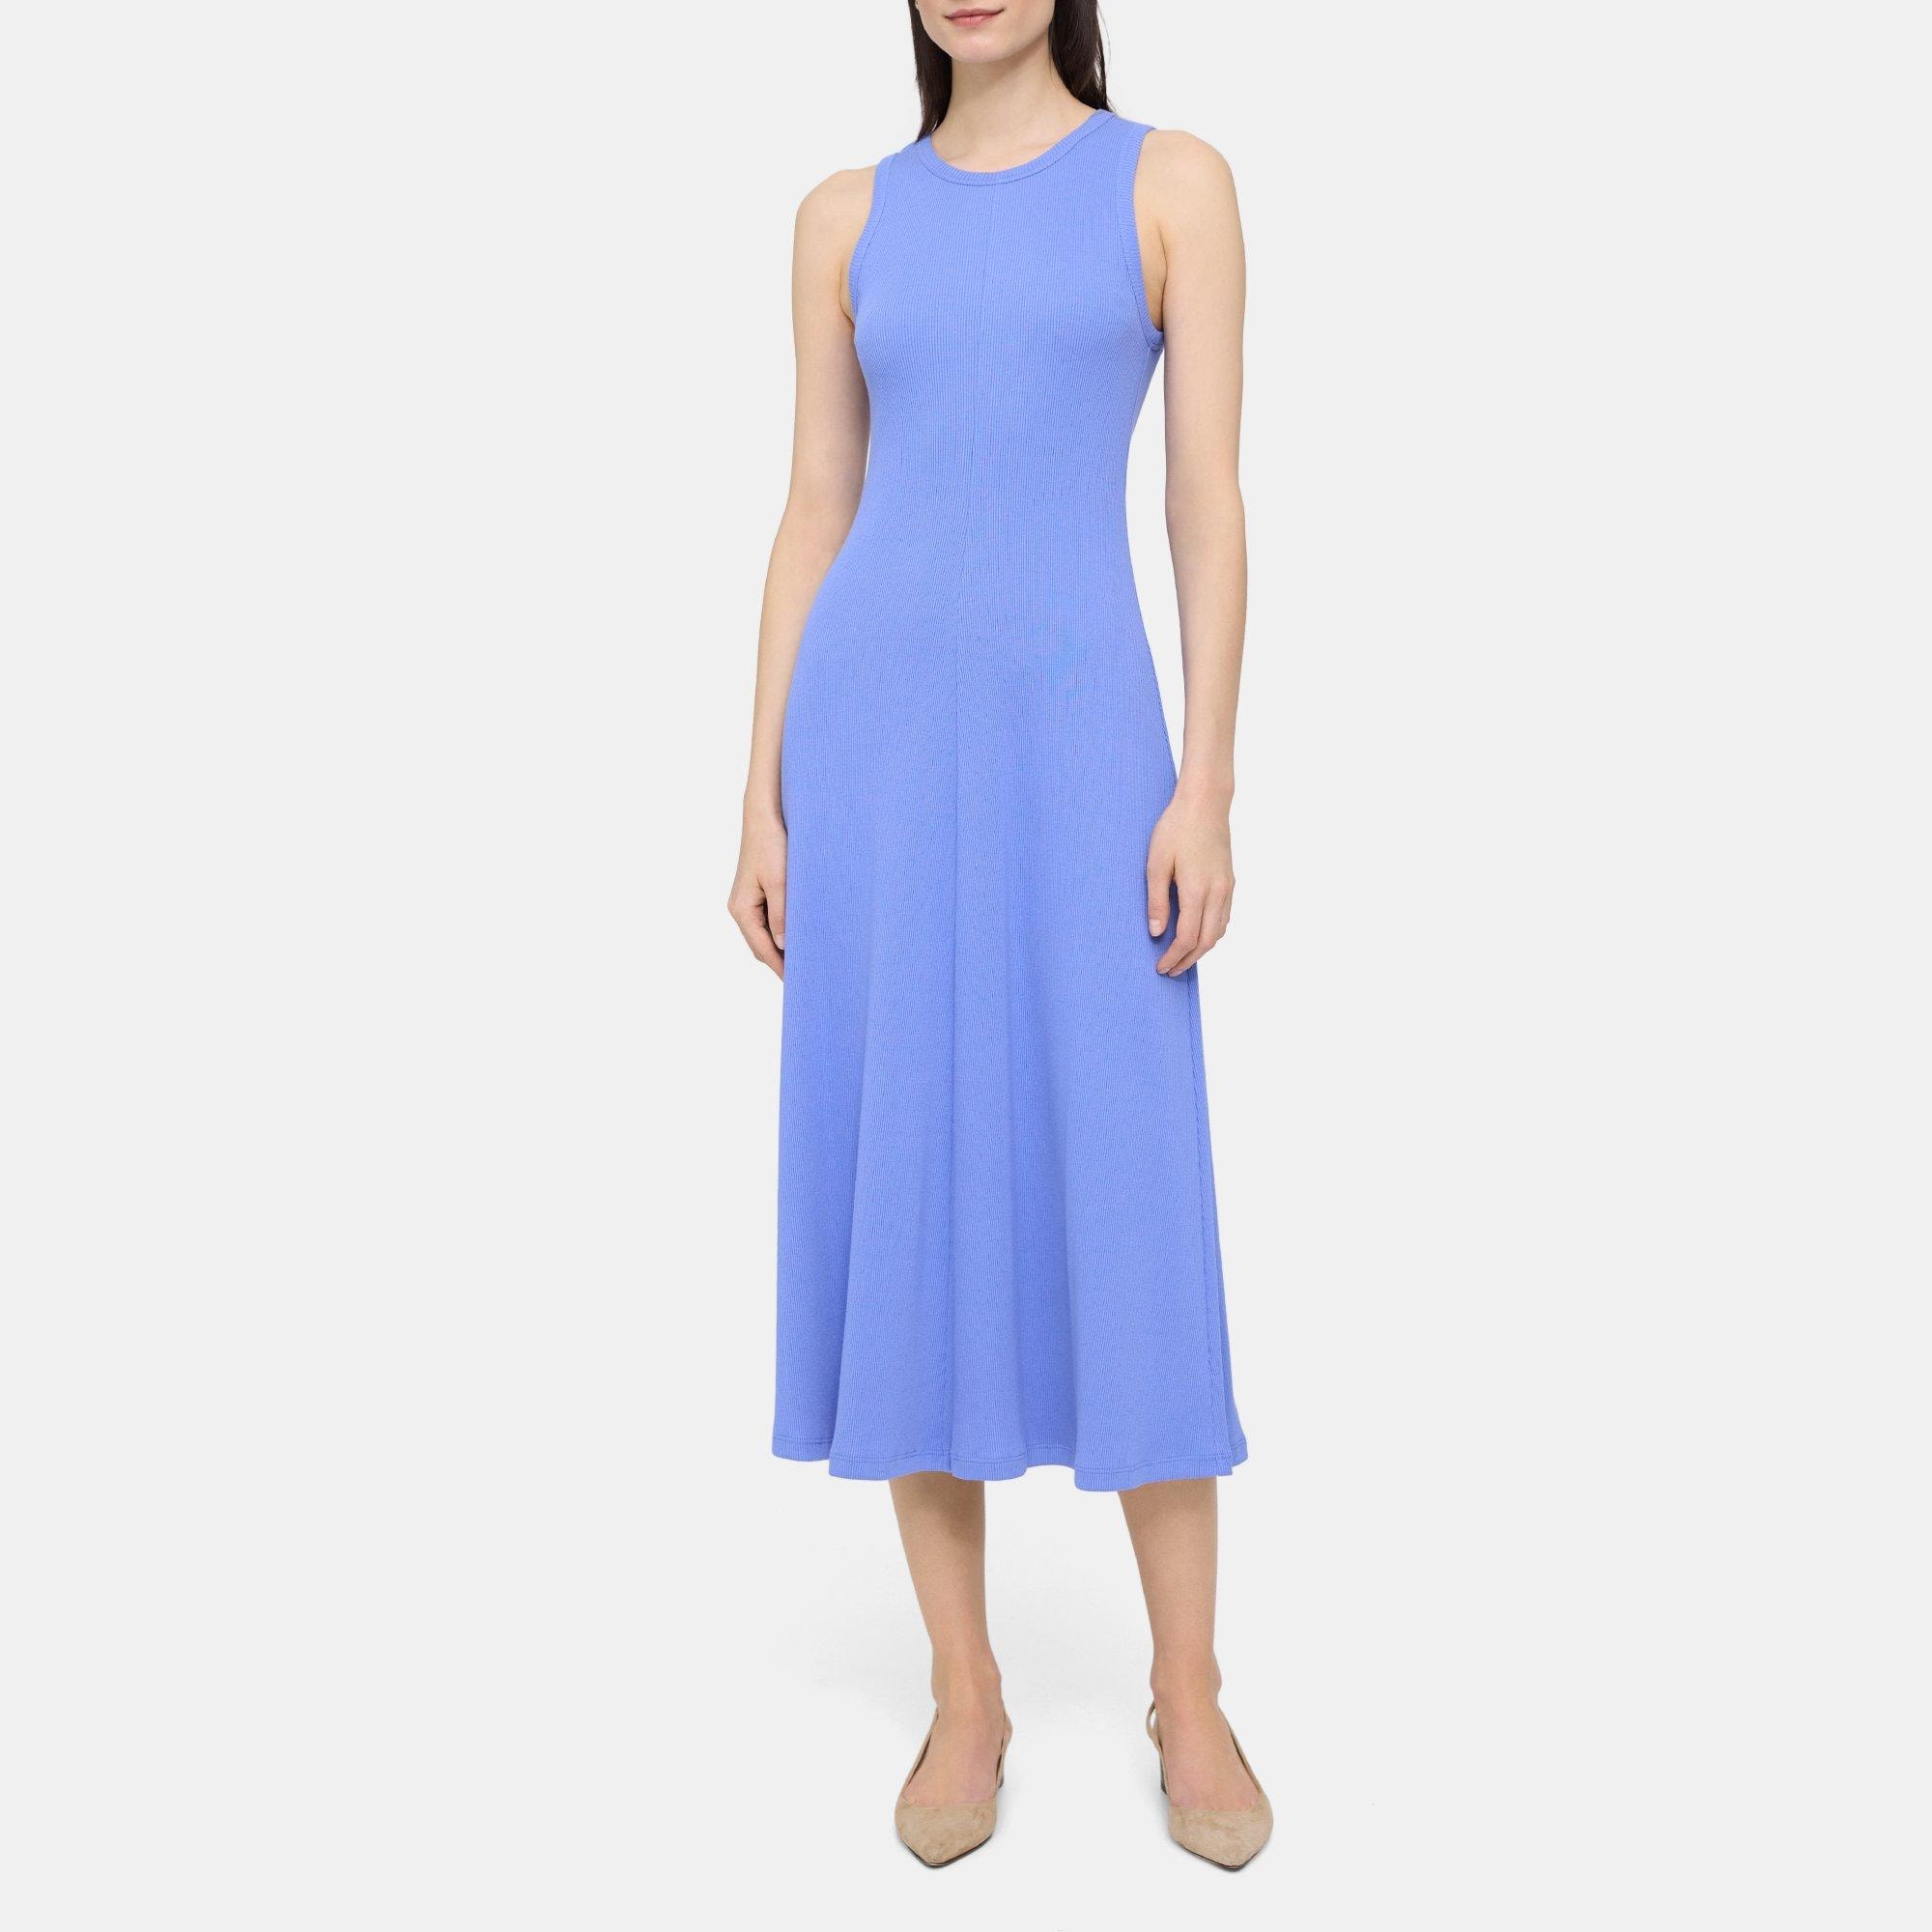 Theory Racerback Midi Dress in Ribbed Modal Cotton